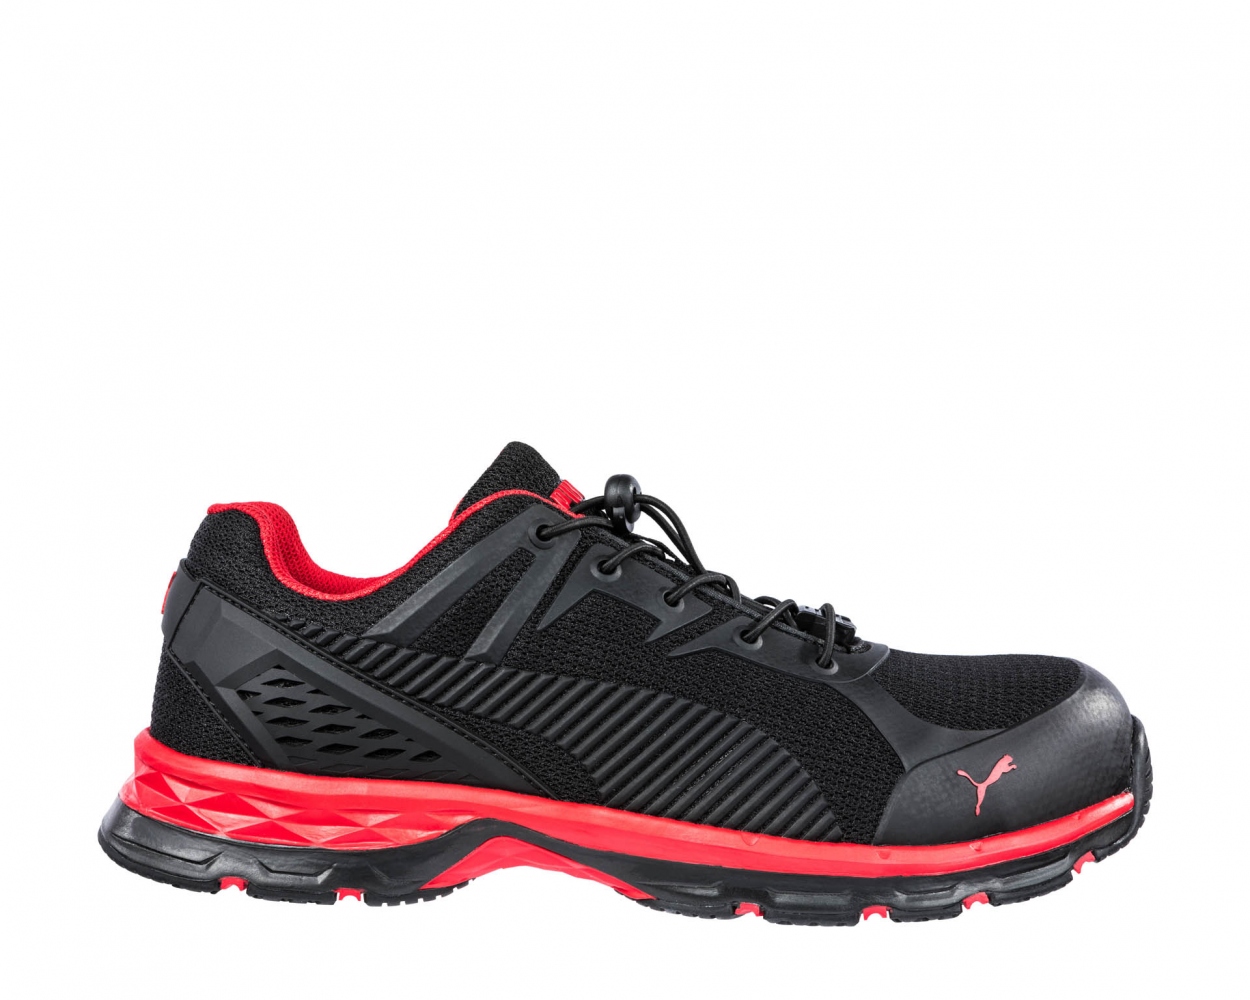 puma fuse motion safety trainers